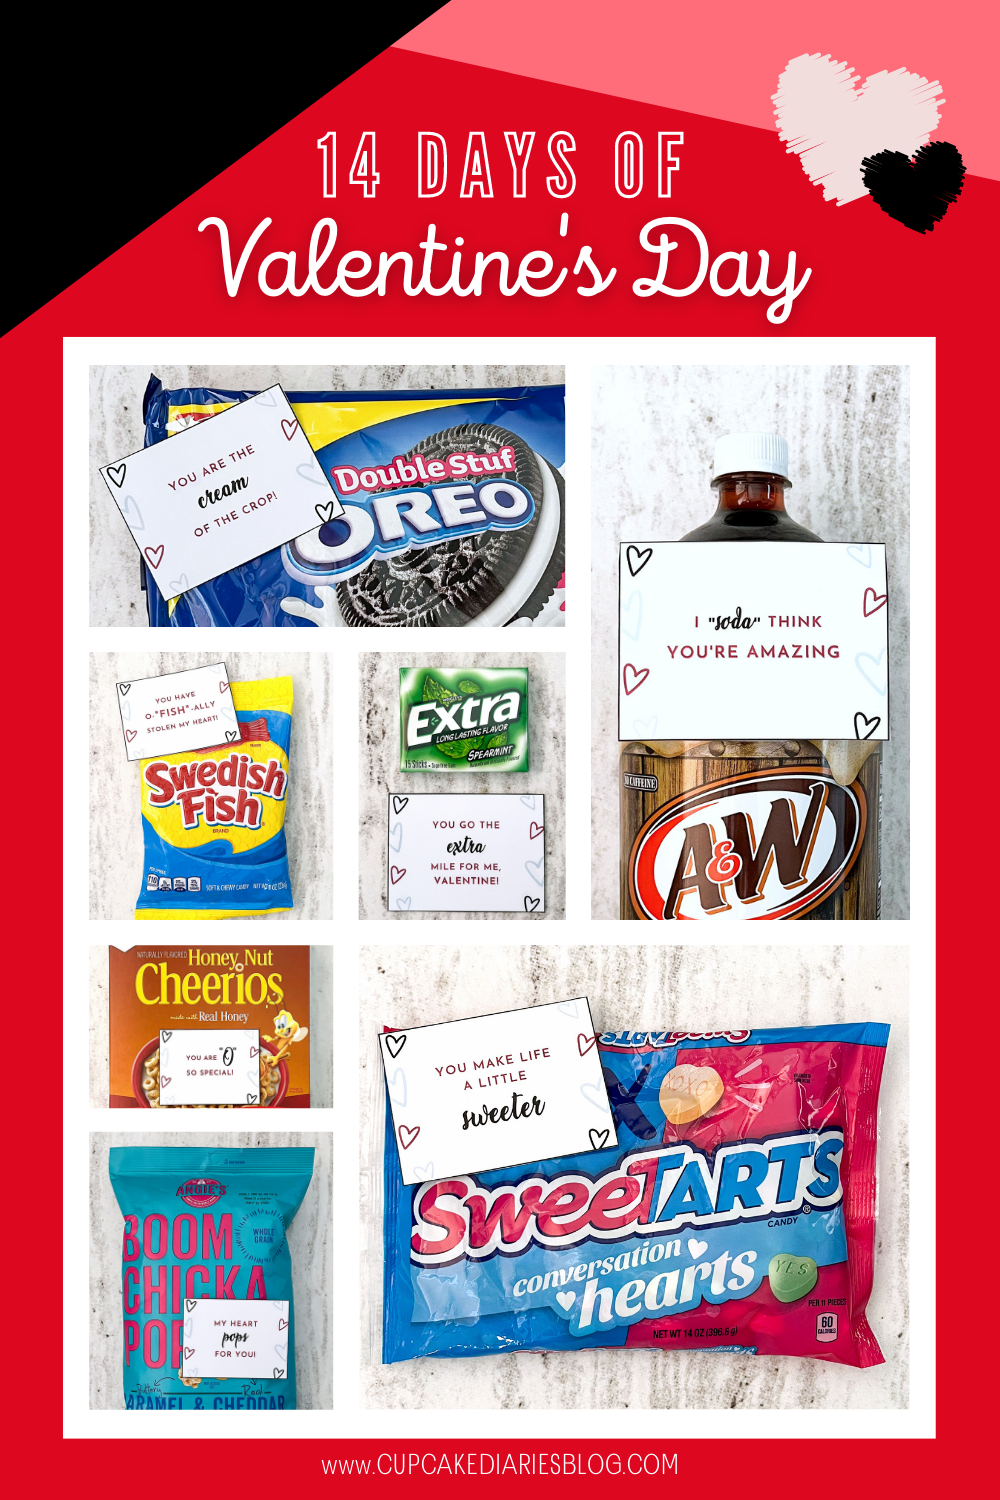 Give your valentine a small gift every day for 14 days leading up to Valentine's Day using these FREE tags!